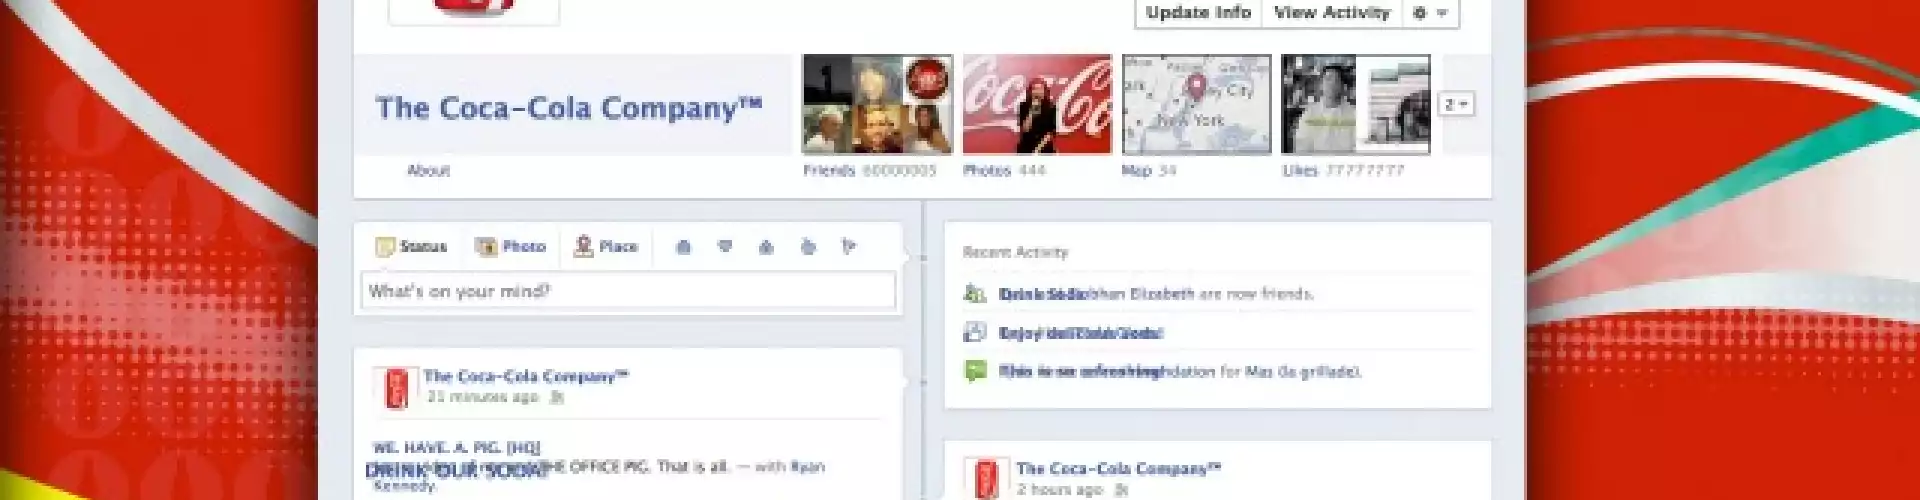 Marketing With Facebook "Timeline" For Pages - Are You Ready To Make The Switch?